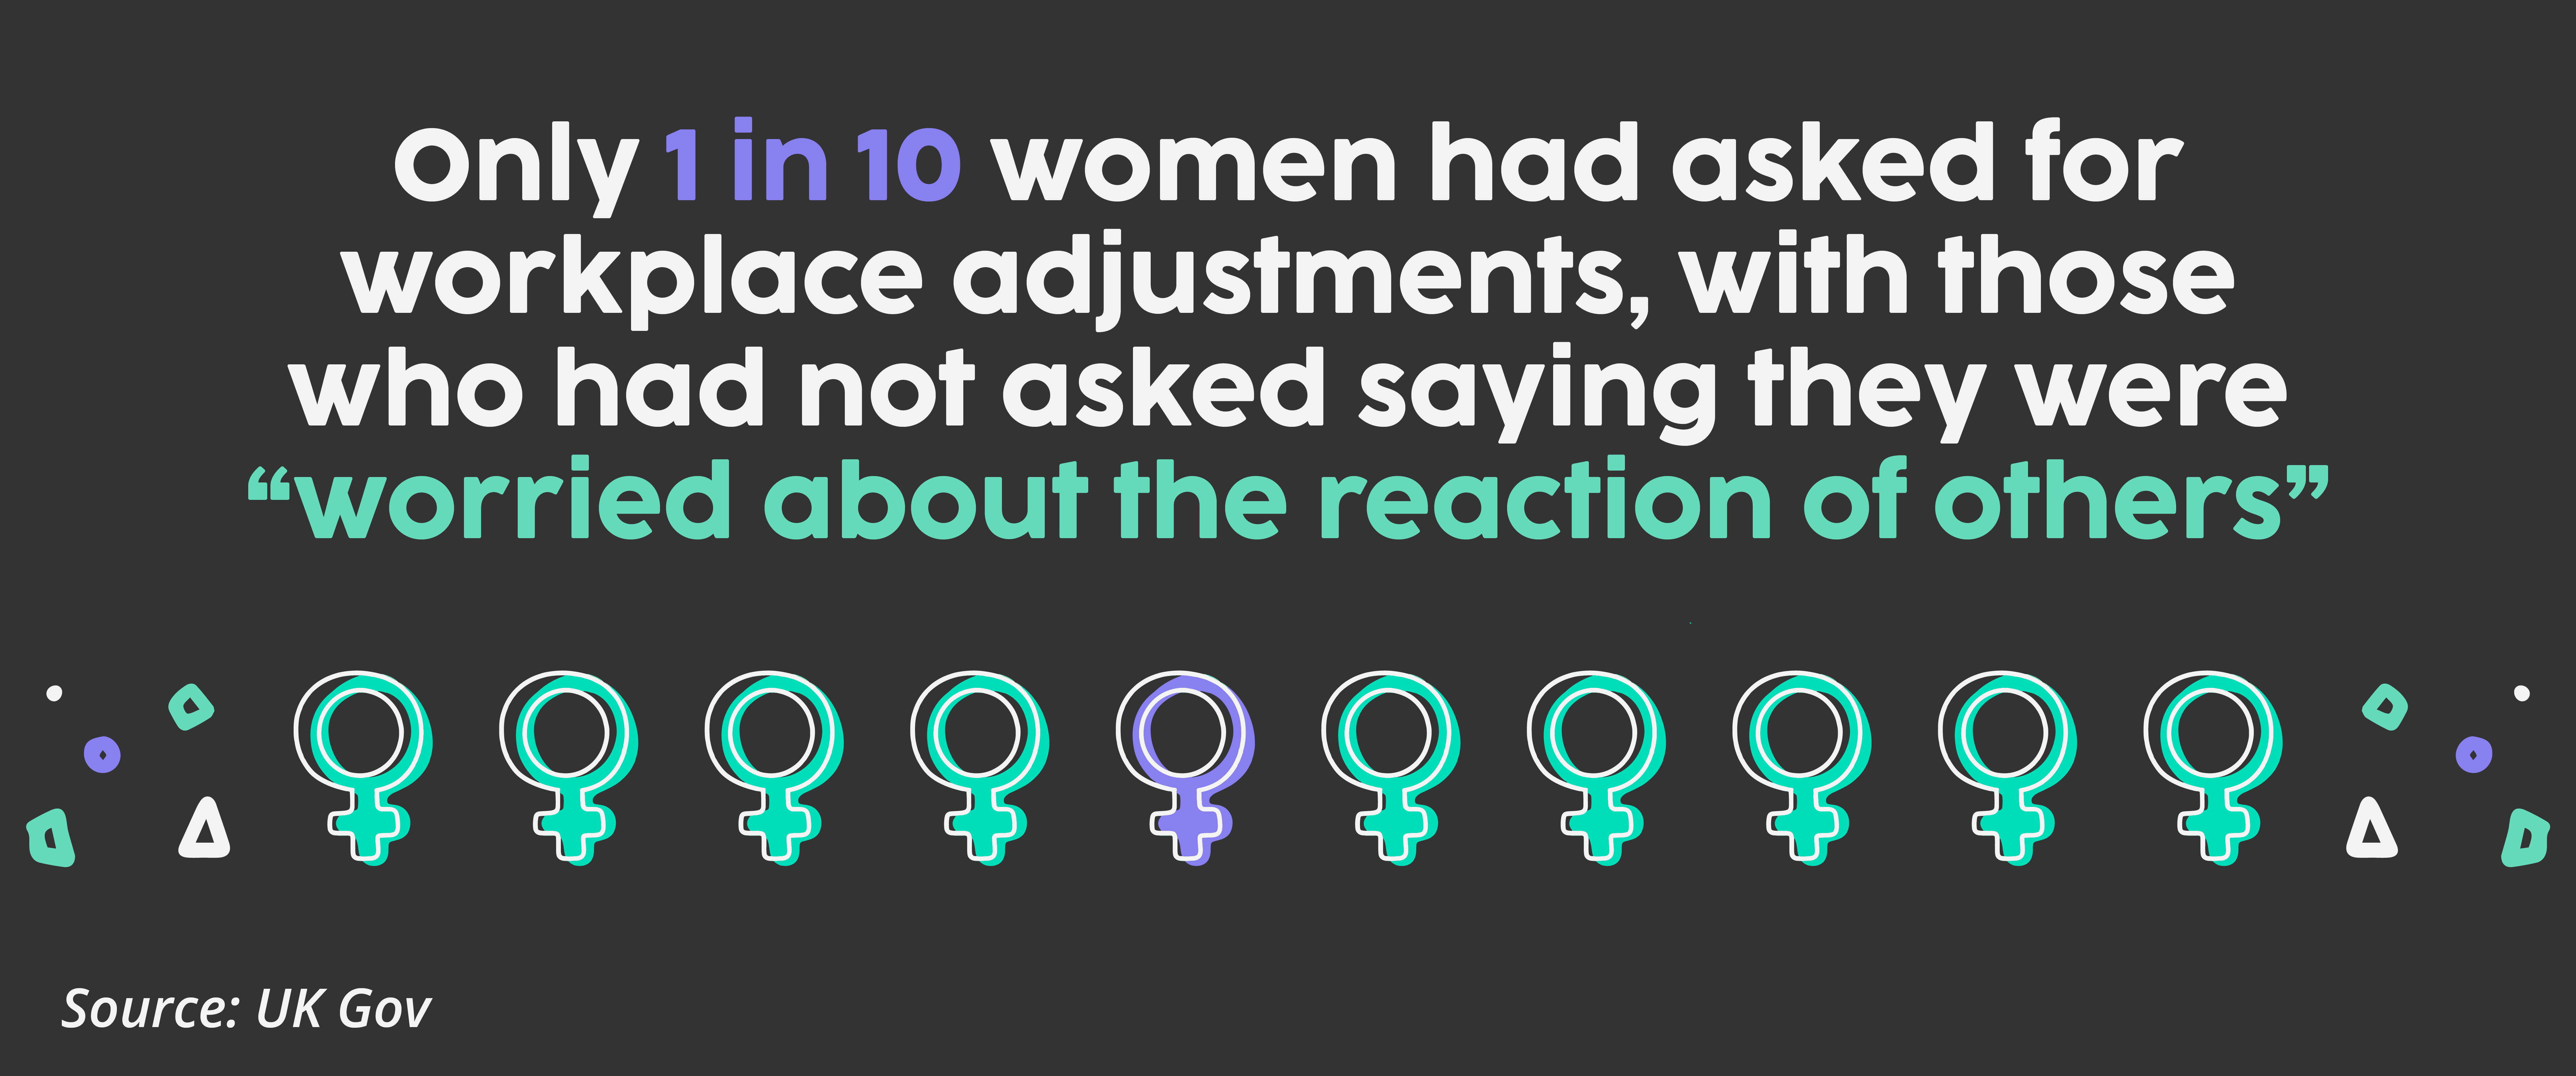 1 in 10 women ask for workplace adjustments, with those who had not asked saying they were “worried about the reaction of others” Source: UK Gov.